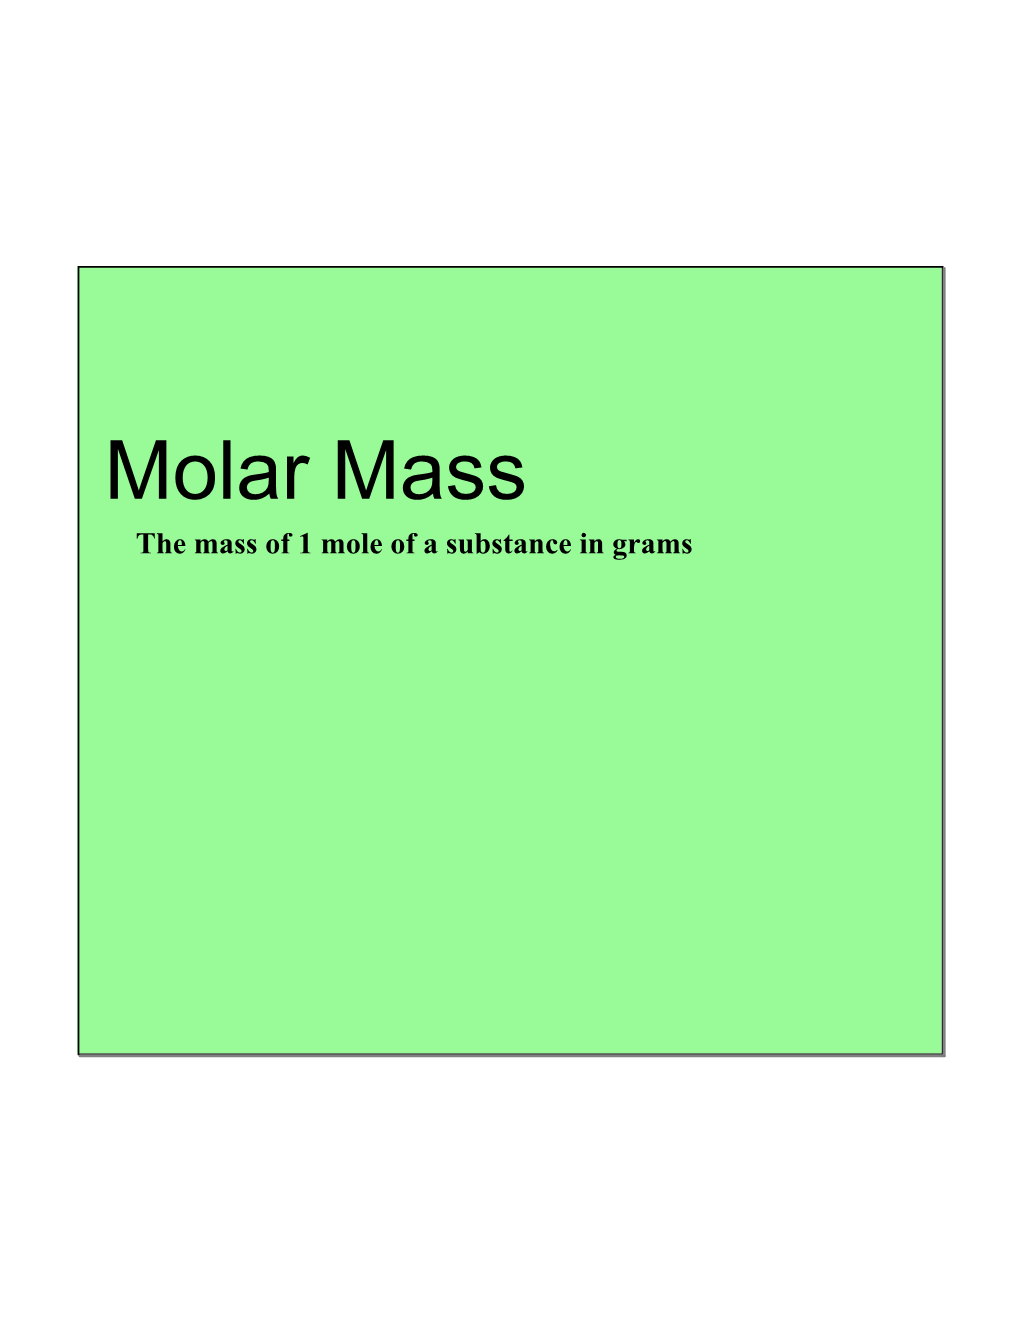 Molar Mass the Mass of 1 Mole of a Substance in Grams How Do We Find the Mass of a Mole of a Certain Element?